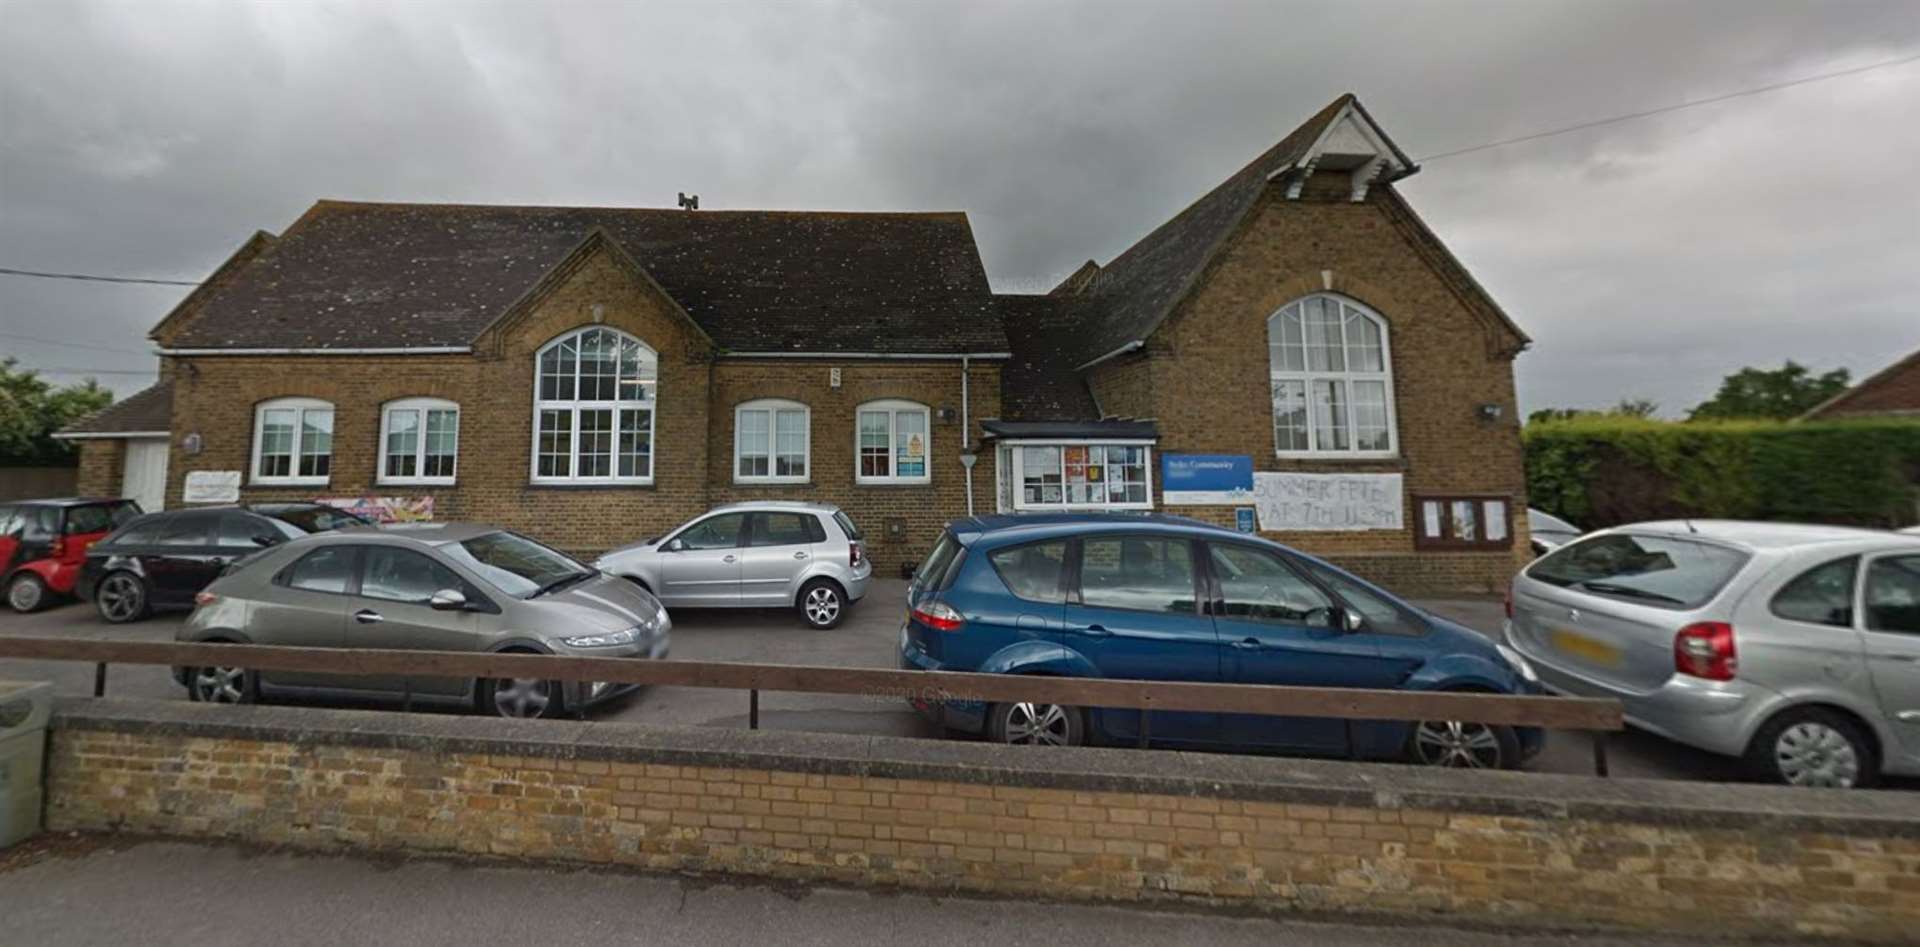 The Stoke Primary Academy is one of the schools subject to the consultation . Picture: Google Maps